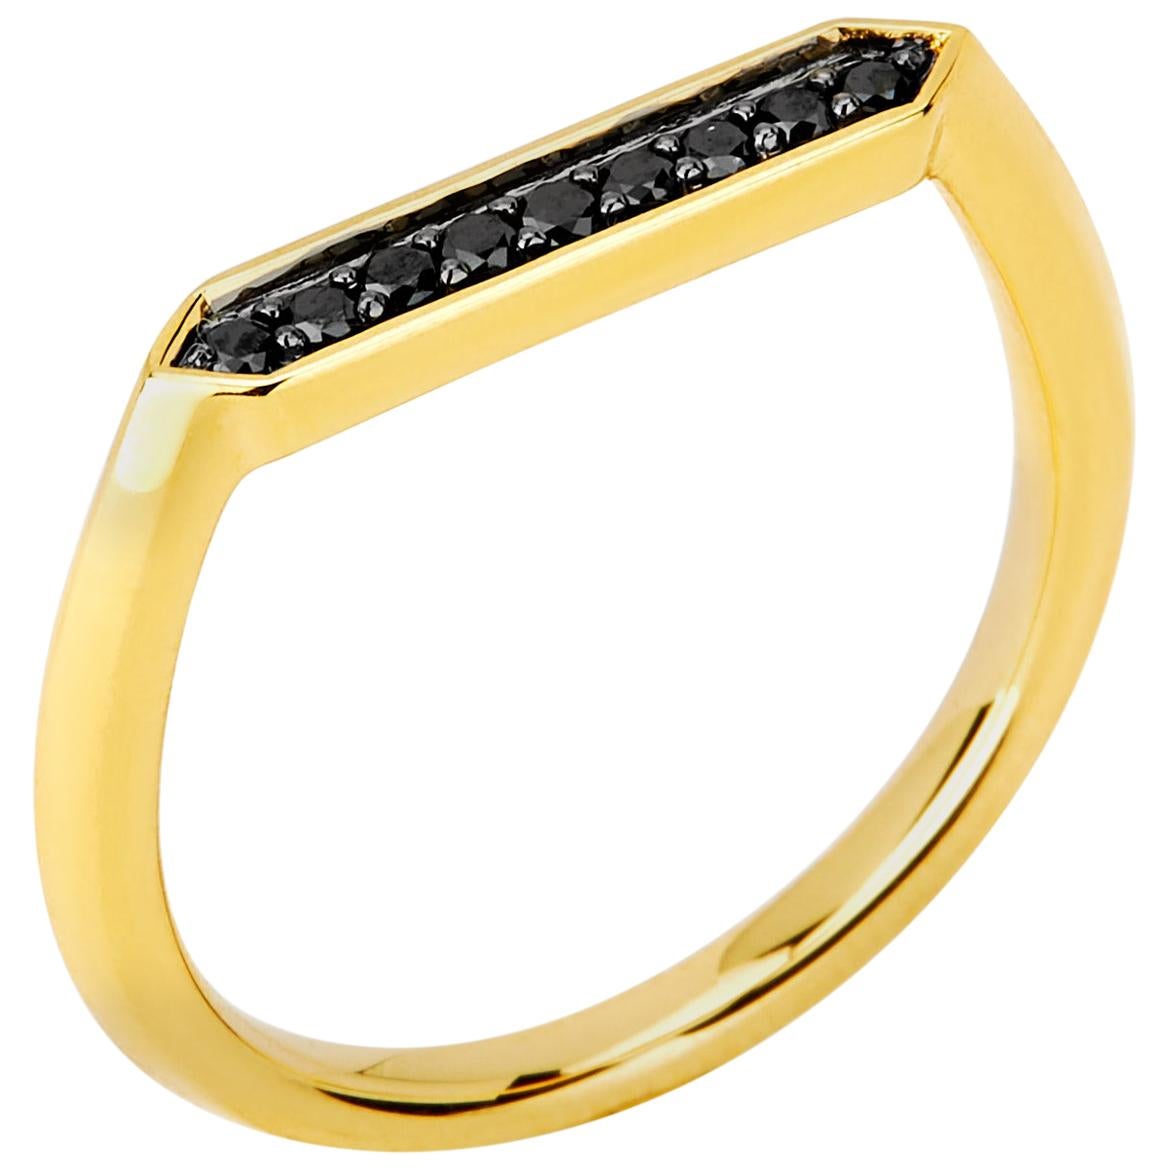 Syna Yellow Gold Hex Ring with Black Diamonds